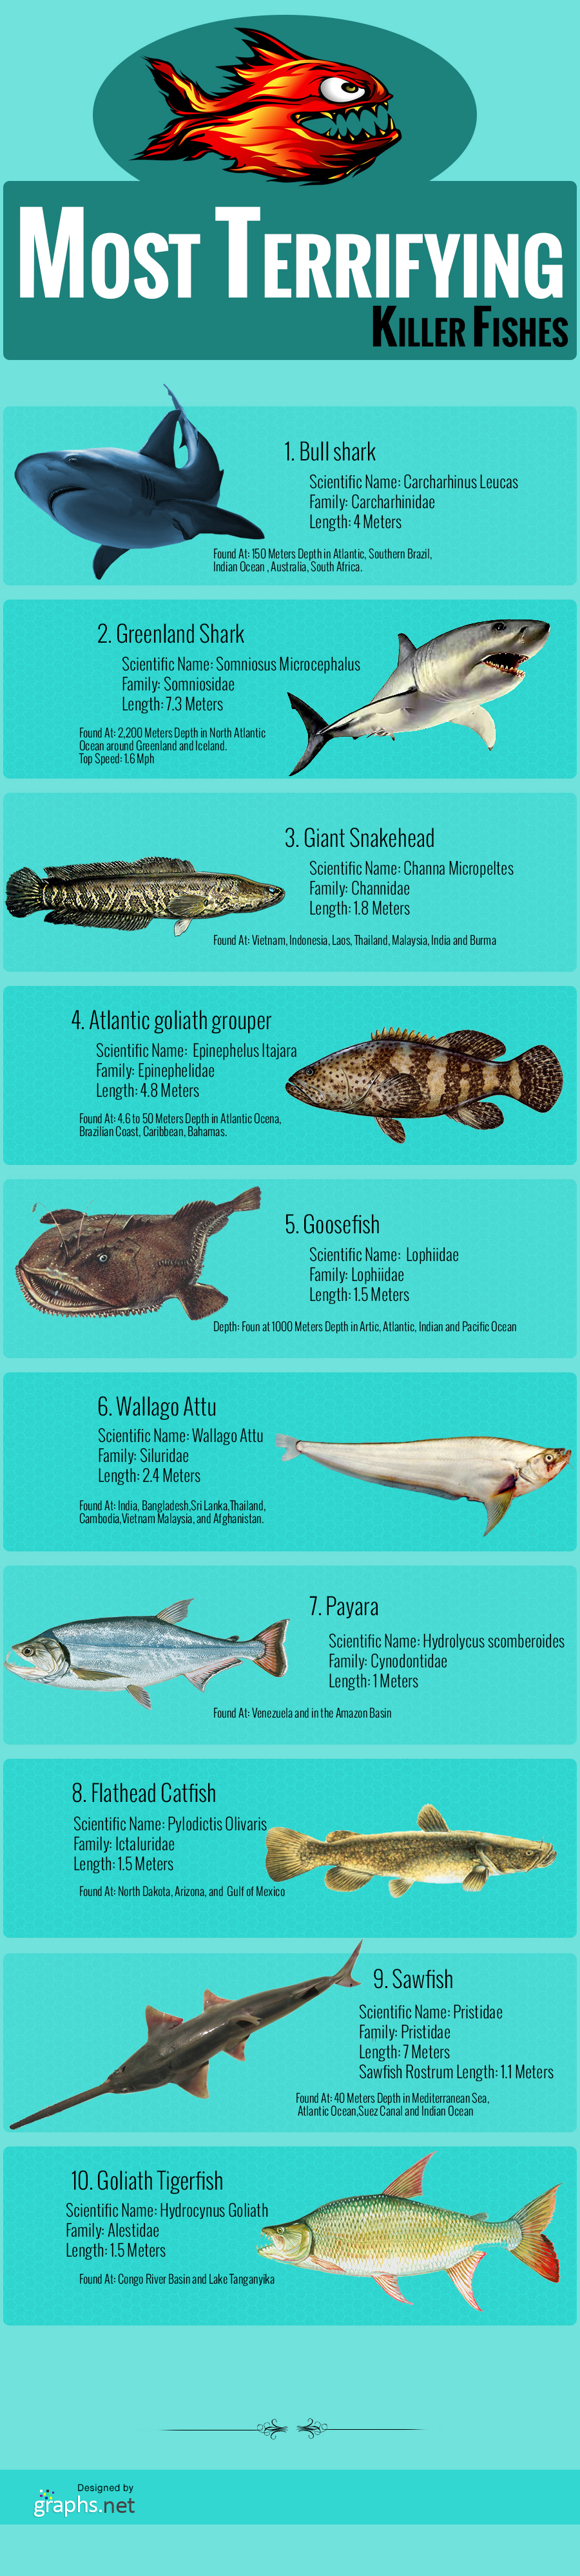 Most Terrifying Killer Fishes 